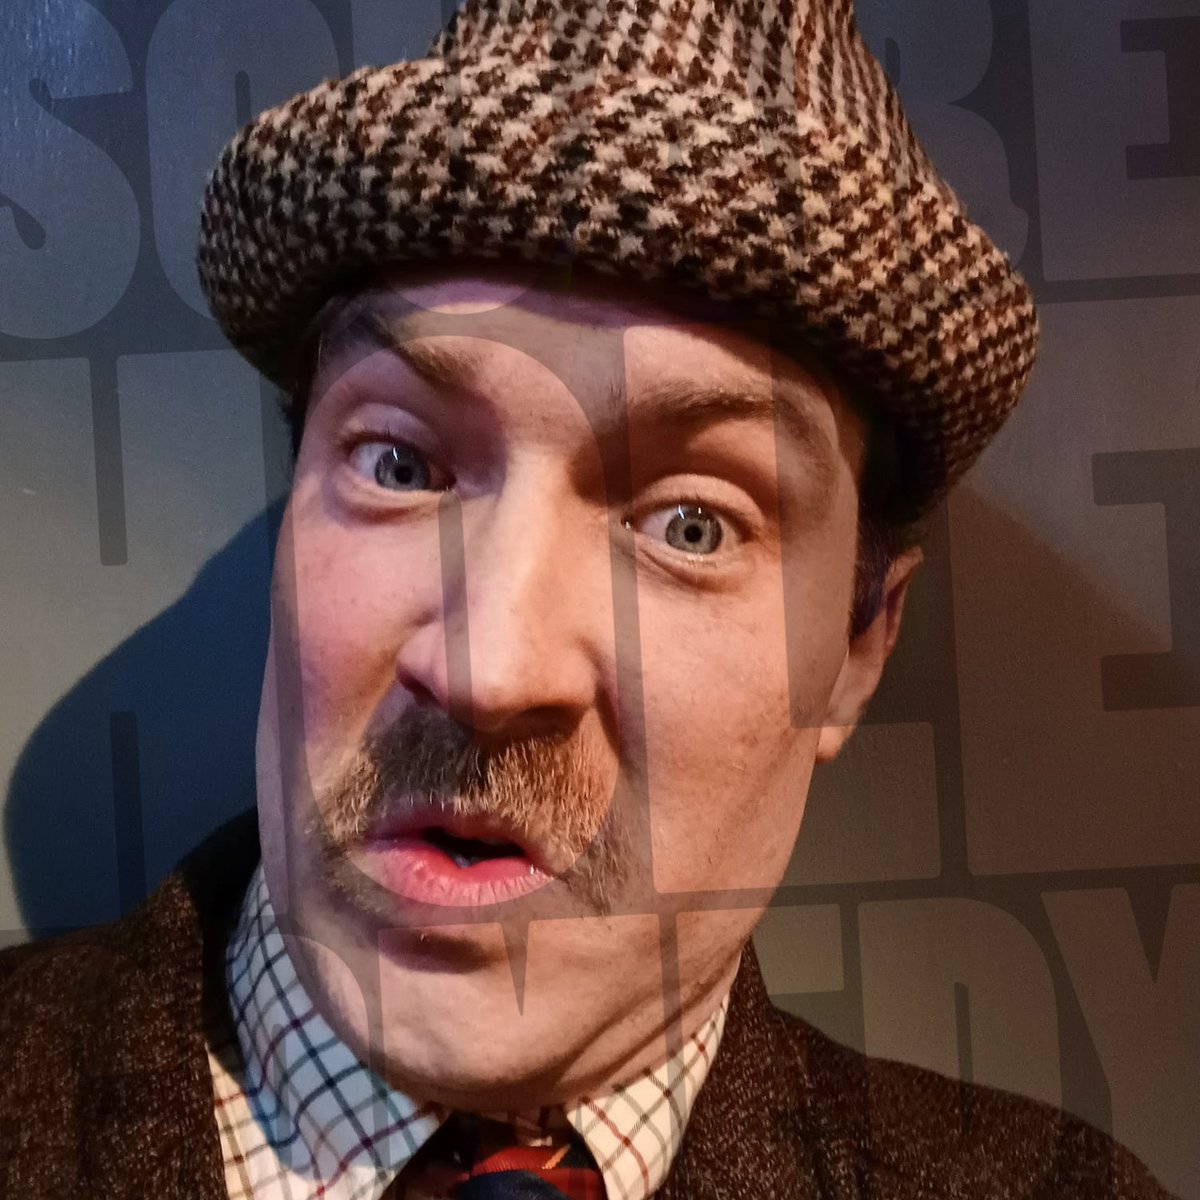 Supporting @PeterFlemingTV tomorrow eve is Stanley Norman! He's an ideas man with big dreams trying to piece his life together and cut his teeth in this vicious world! Absurdist character comedy of the highest calibre from @stanskinny. Quite the combo! 🎟️ wegottickets.com/event/558896